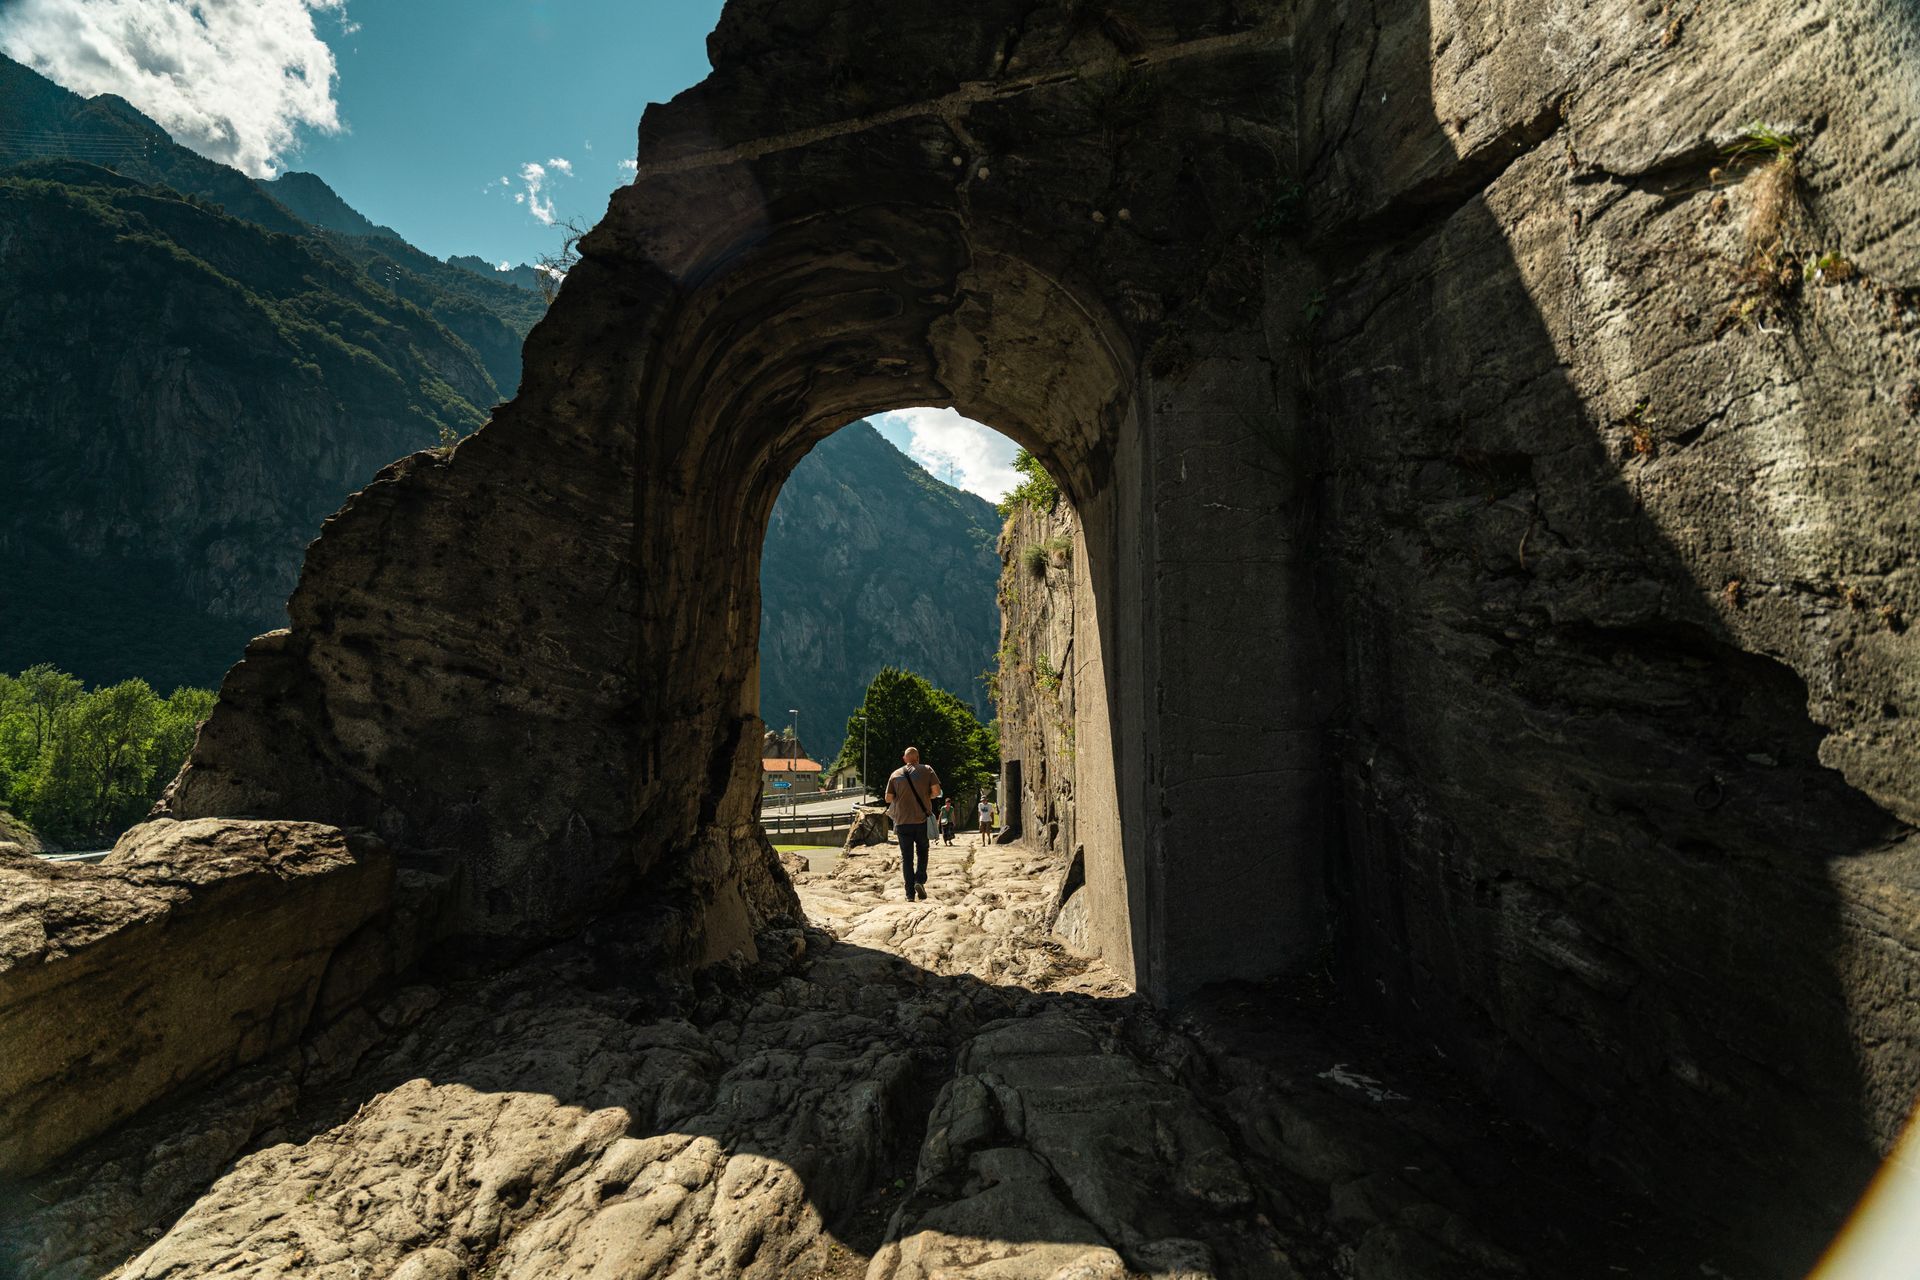 Hiking in Italy: 5 routes of the Via Francigena in Aosta Valley